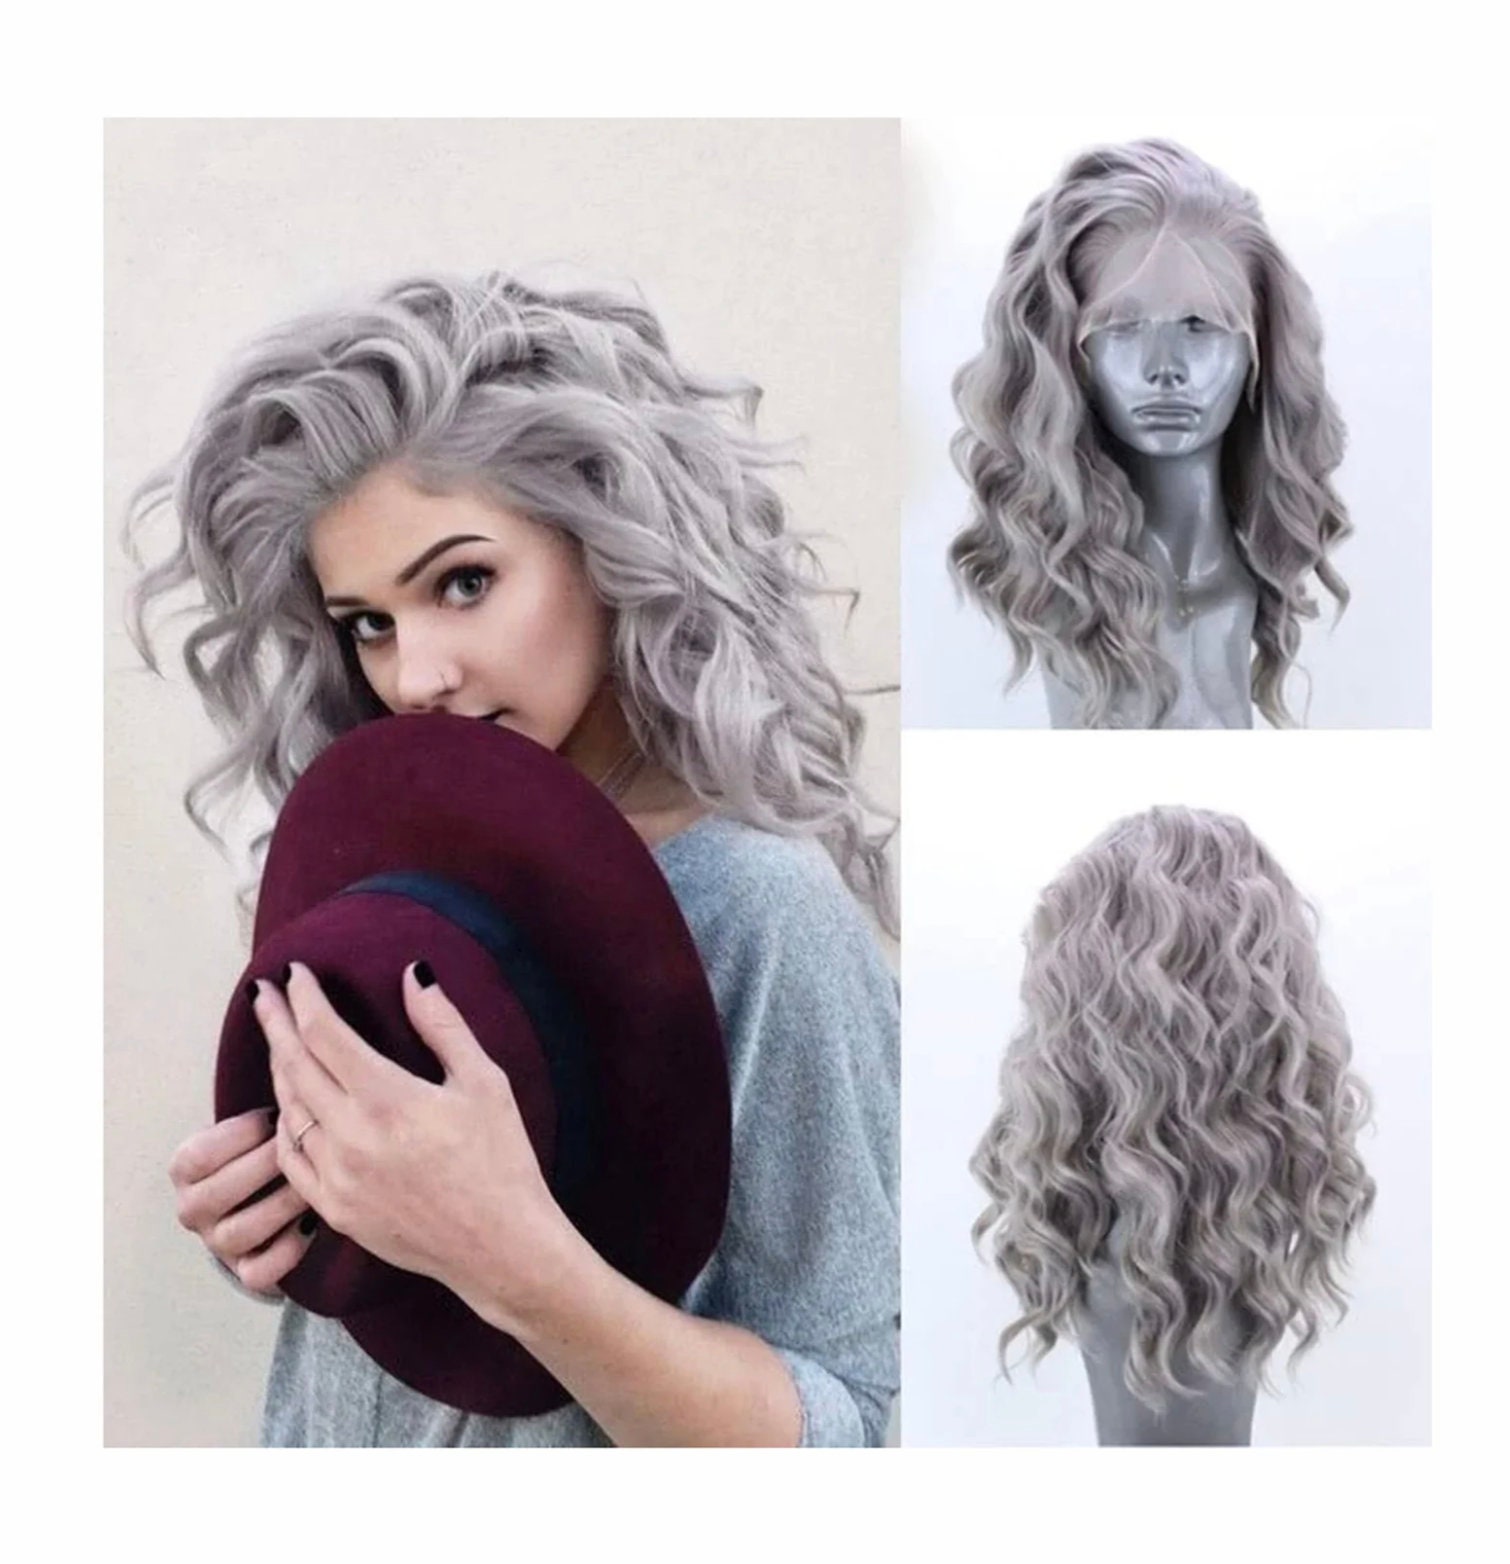 Silver Gray Wigs for Women, Fluffy and Undeformed Women's Silver Gray Short Curly Wig with Bangs Classic Natural Shape Gray Short Wig for